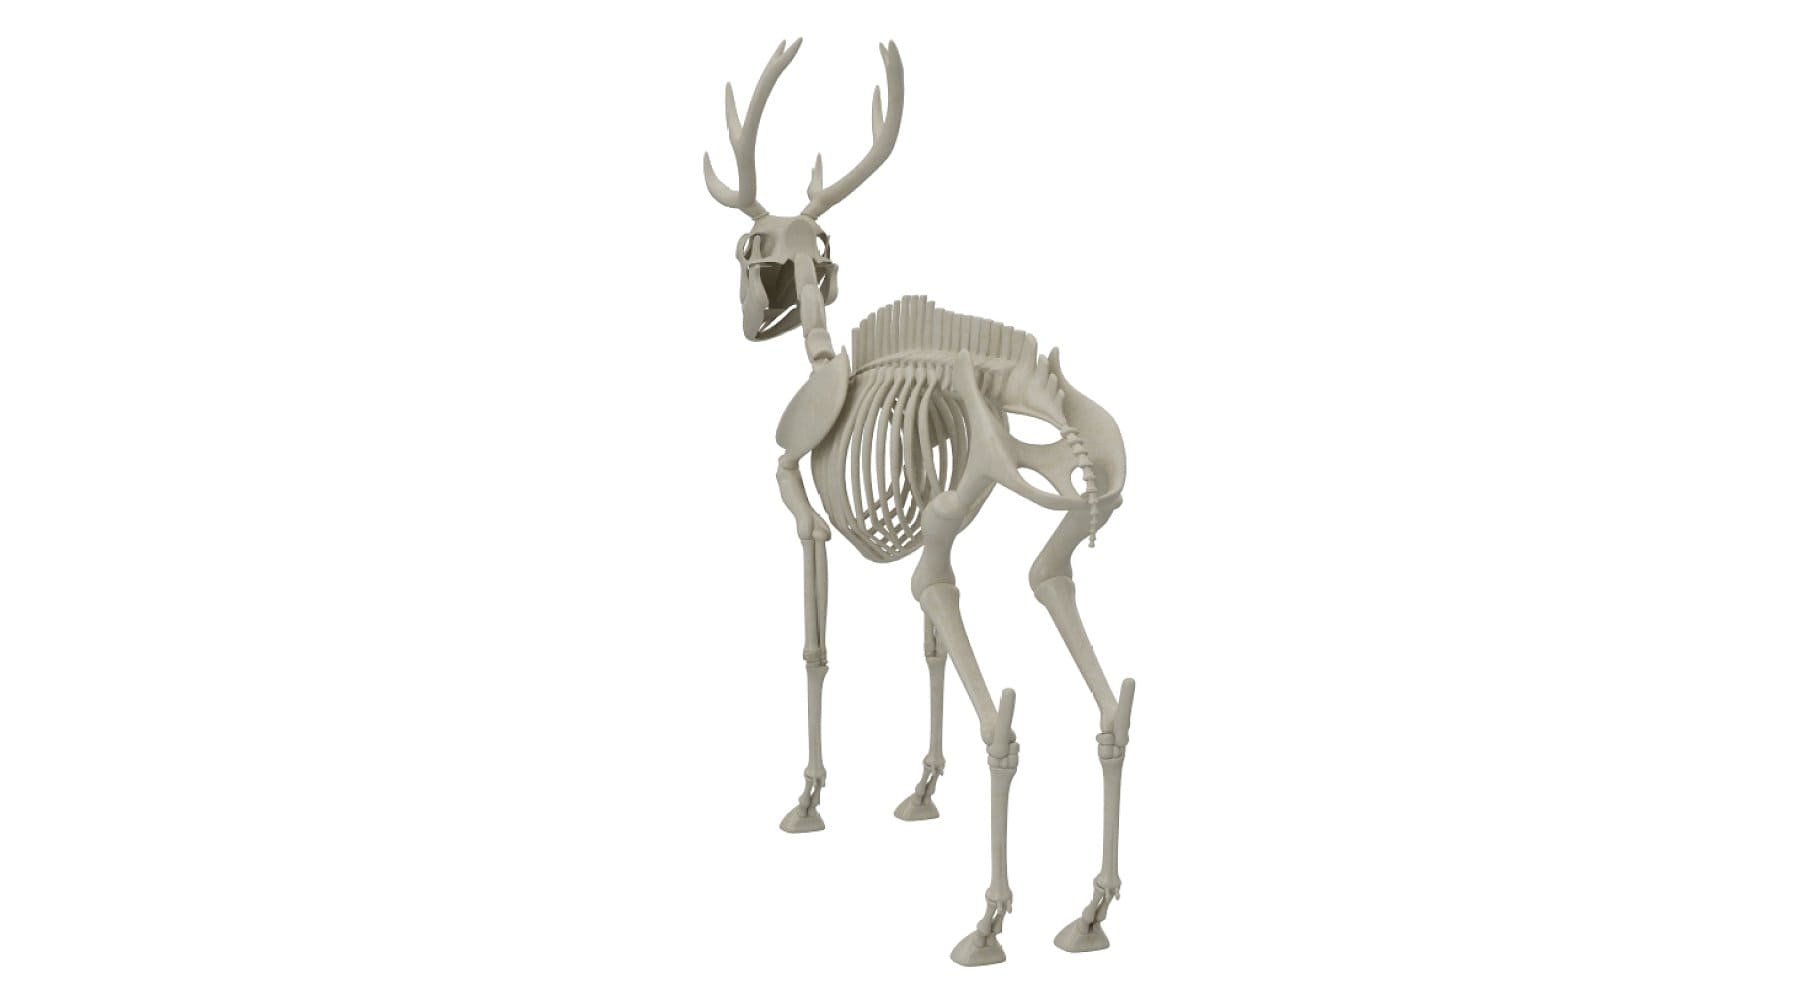 An image of the back of a deer with a thin tail.